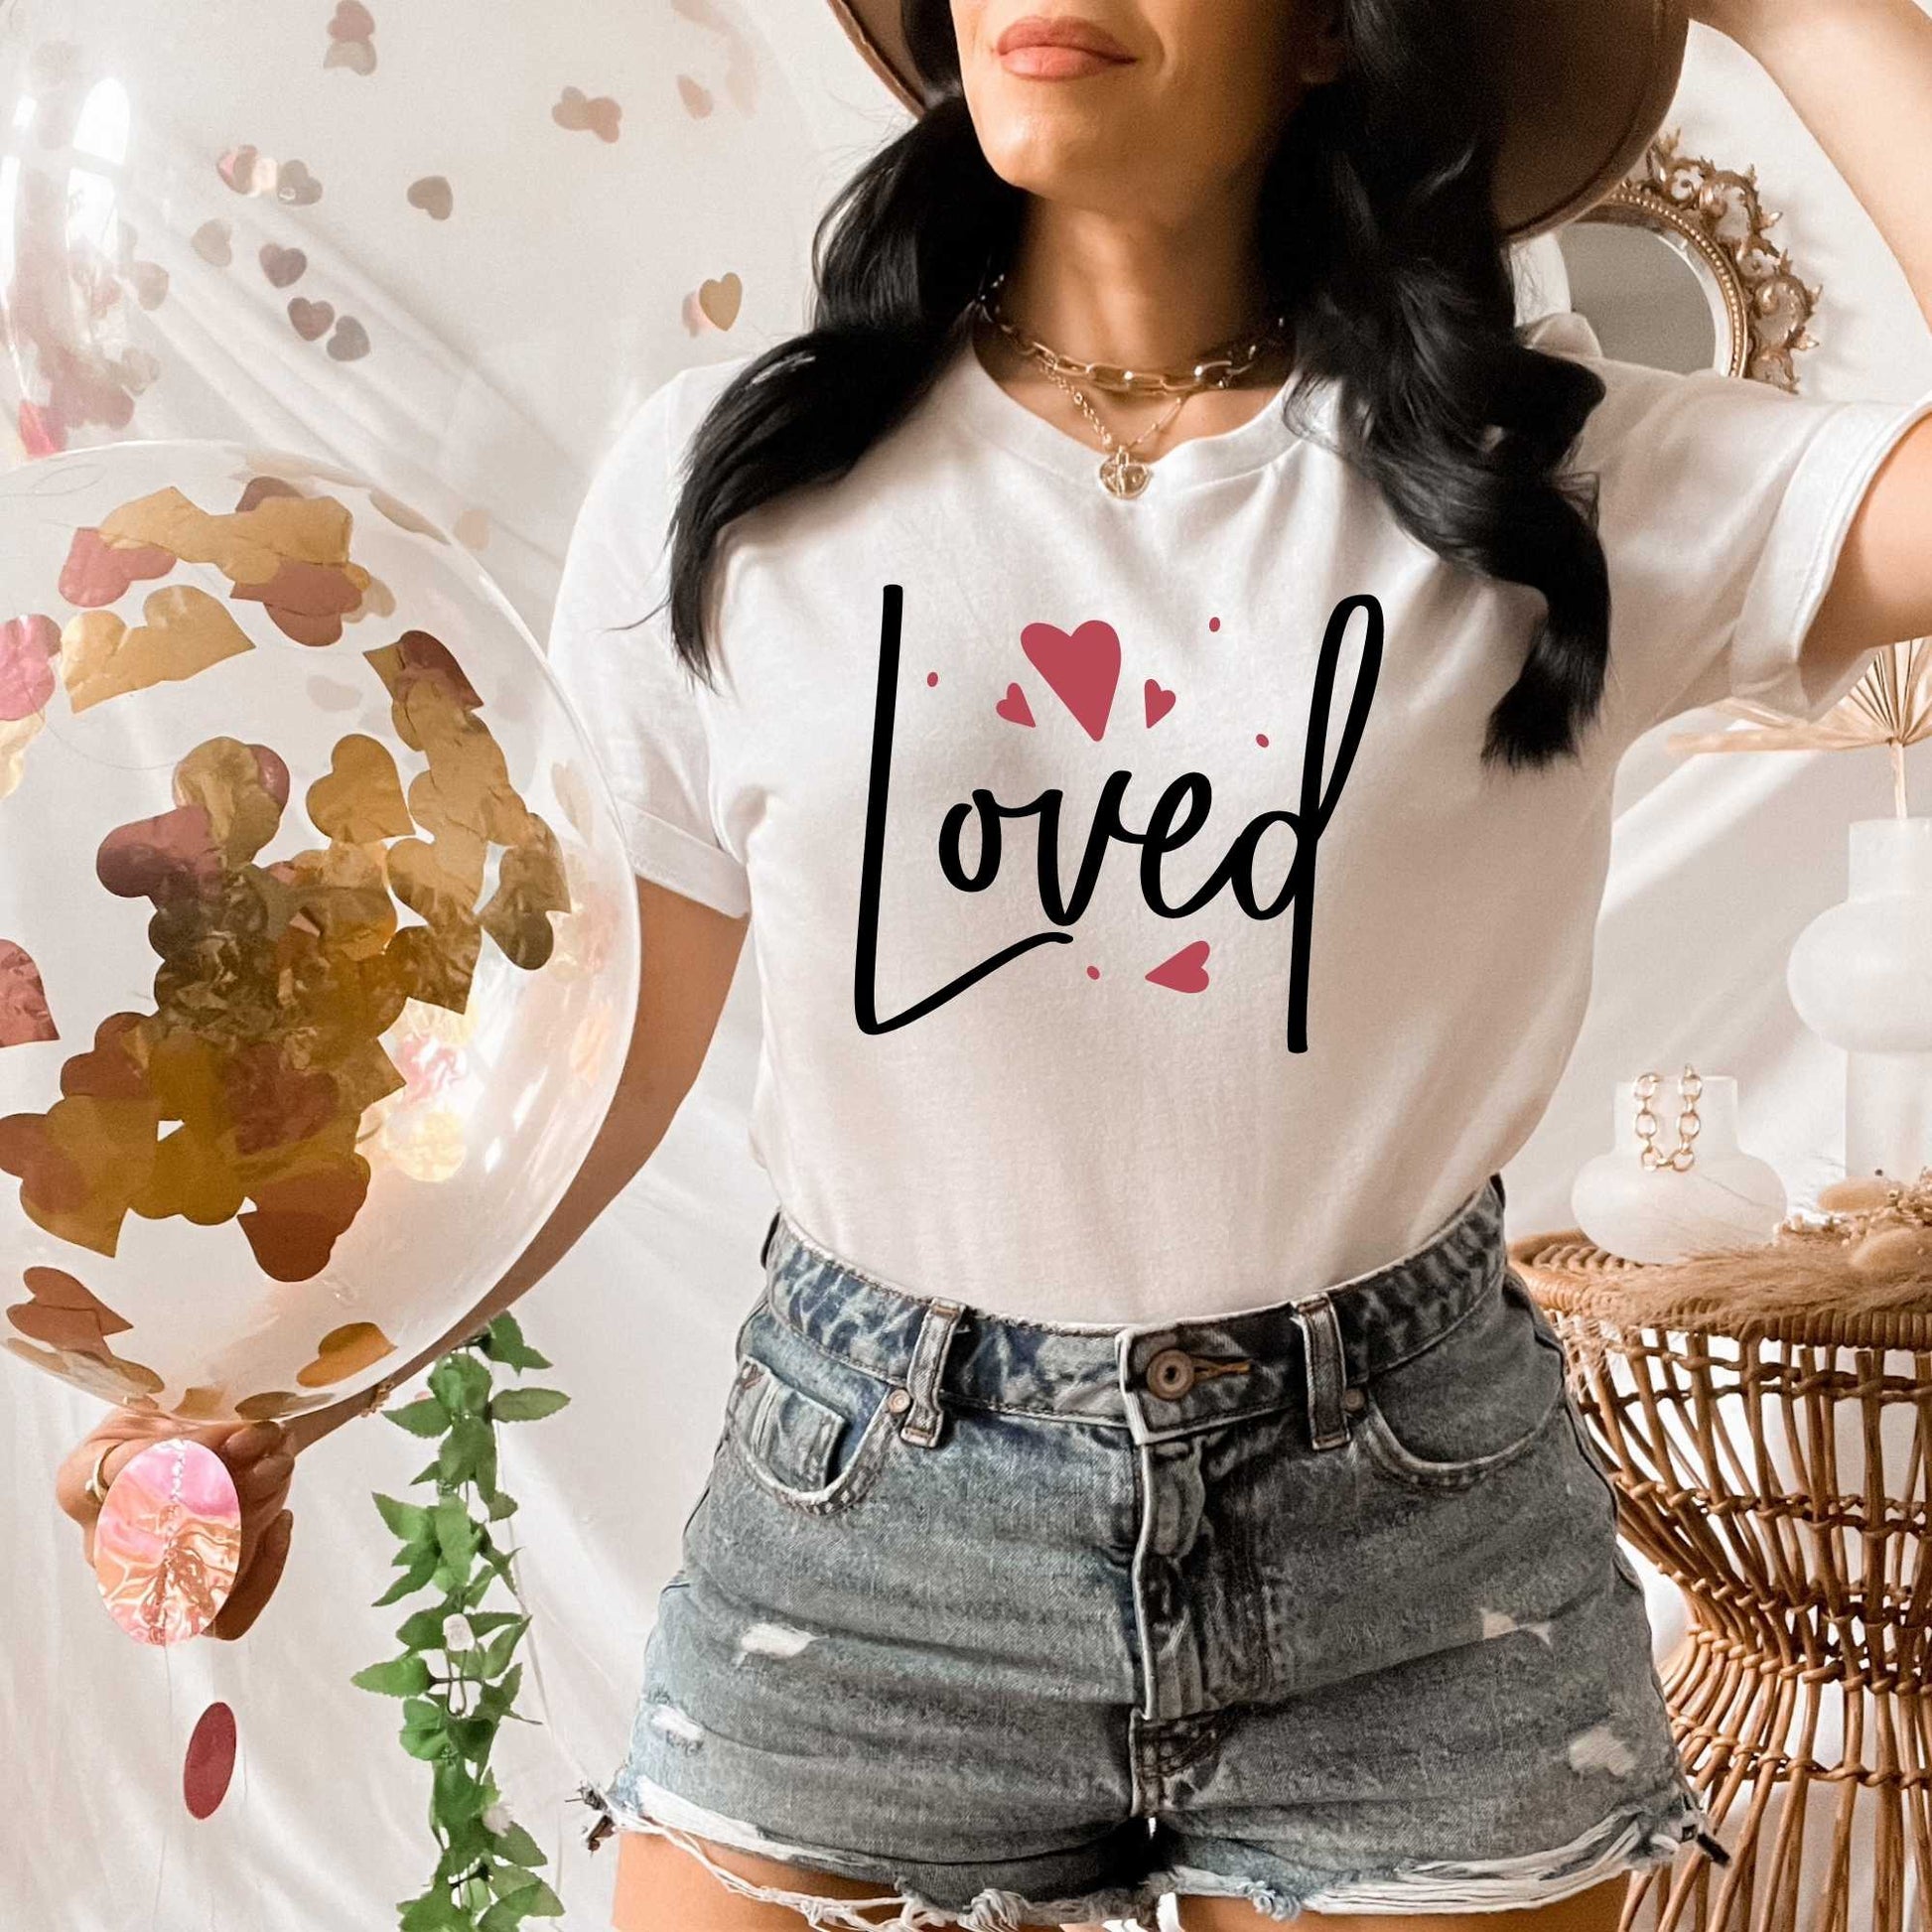 Loved, Cute Christian Shirts about Love for Women or Men